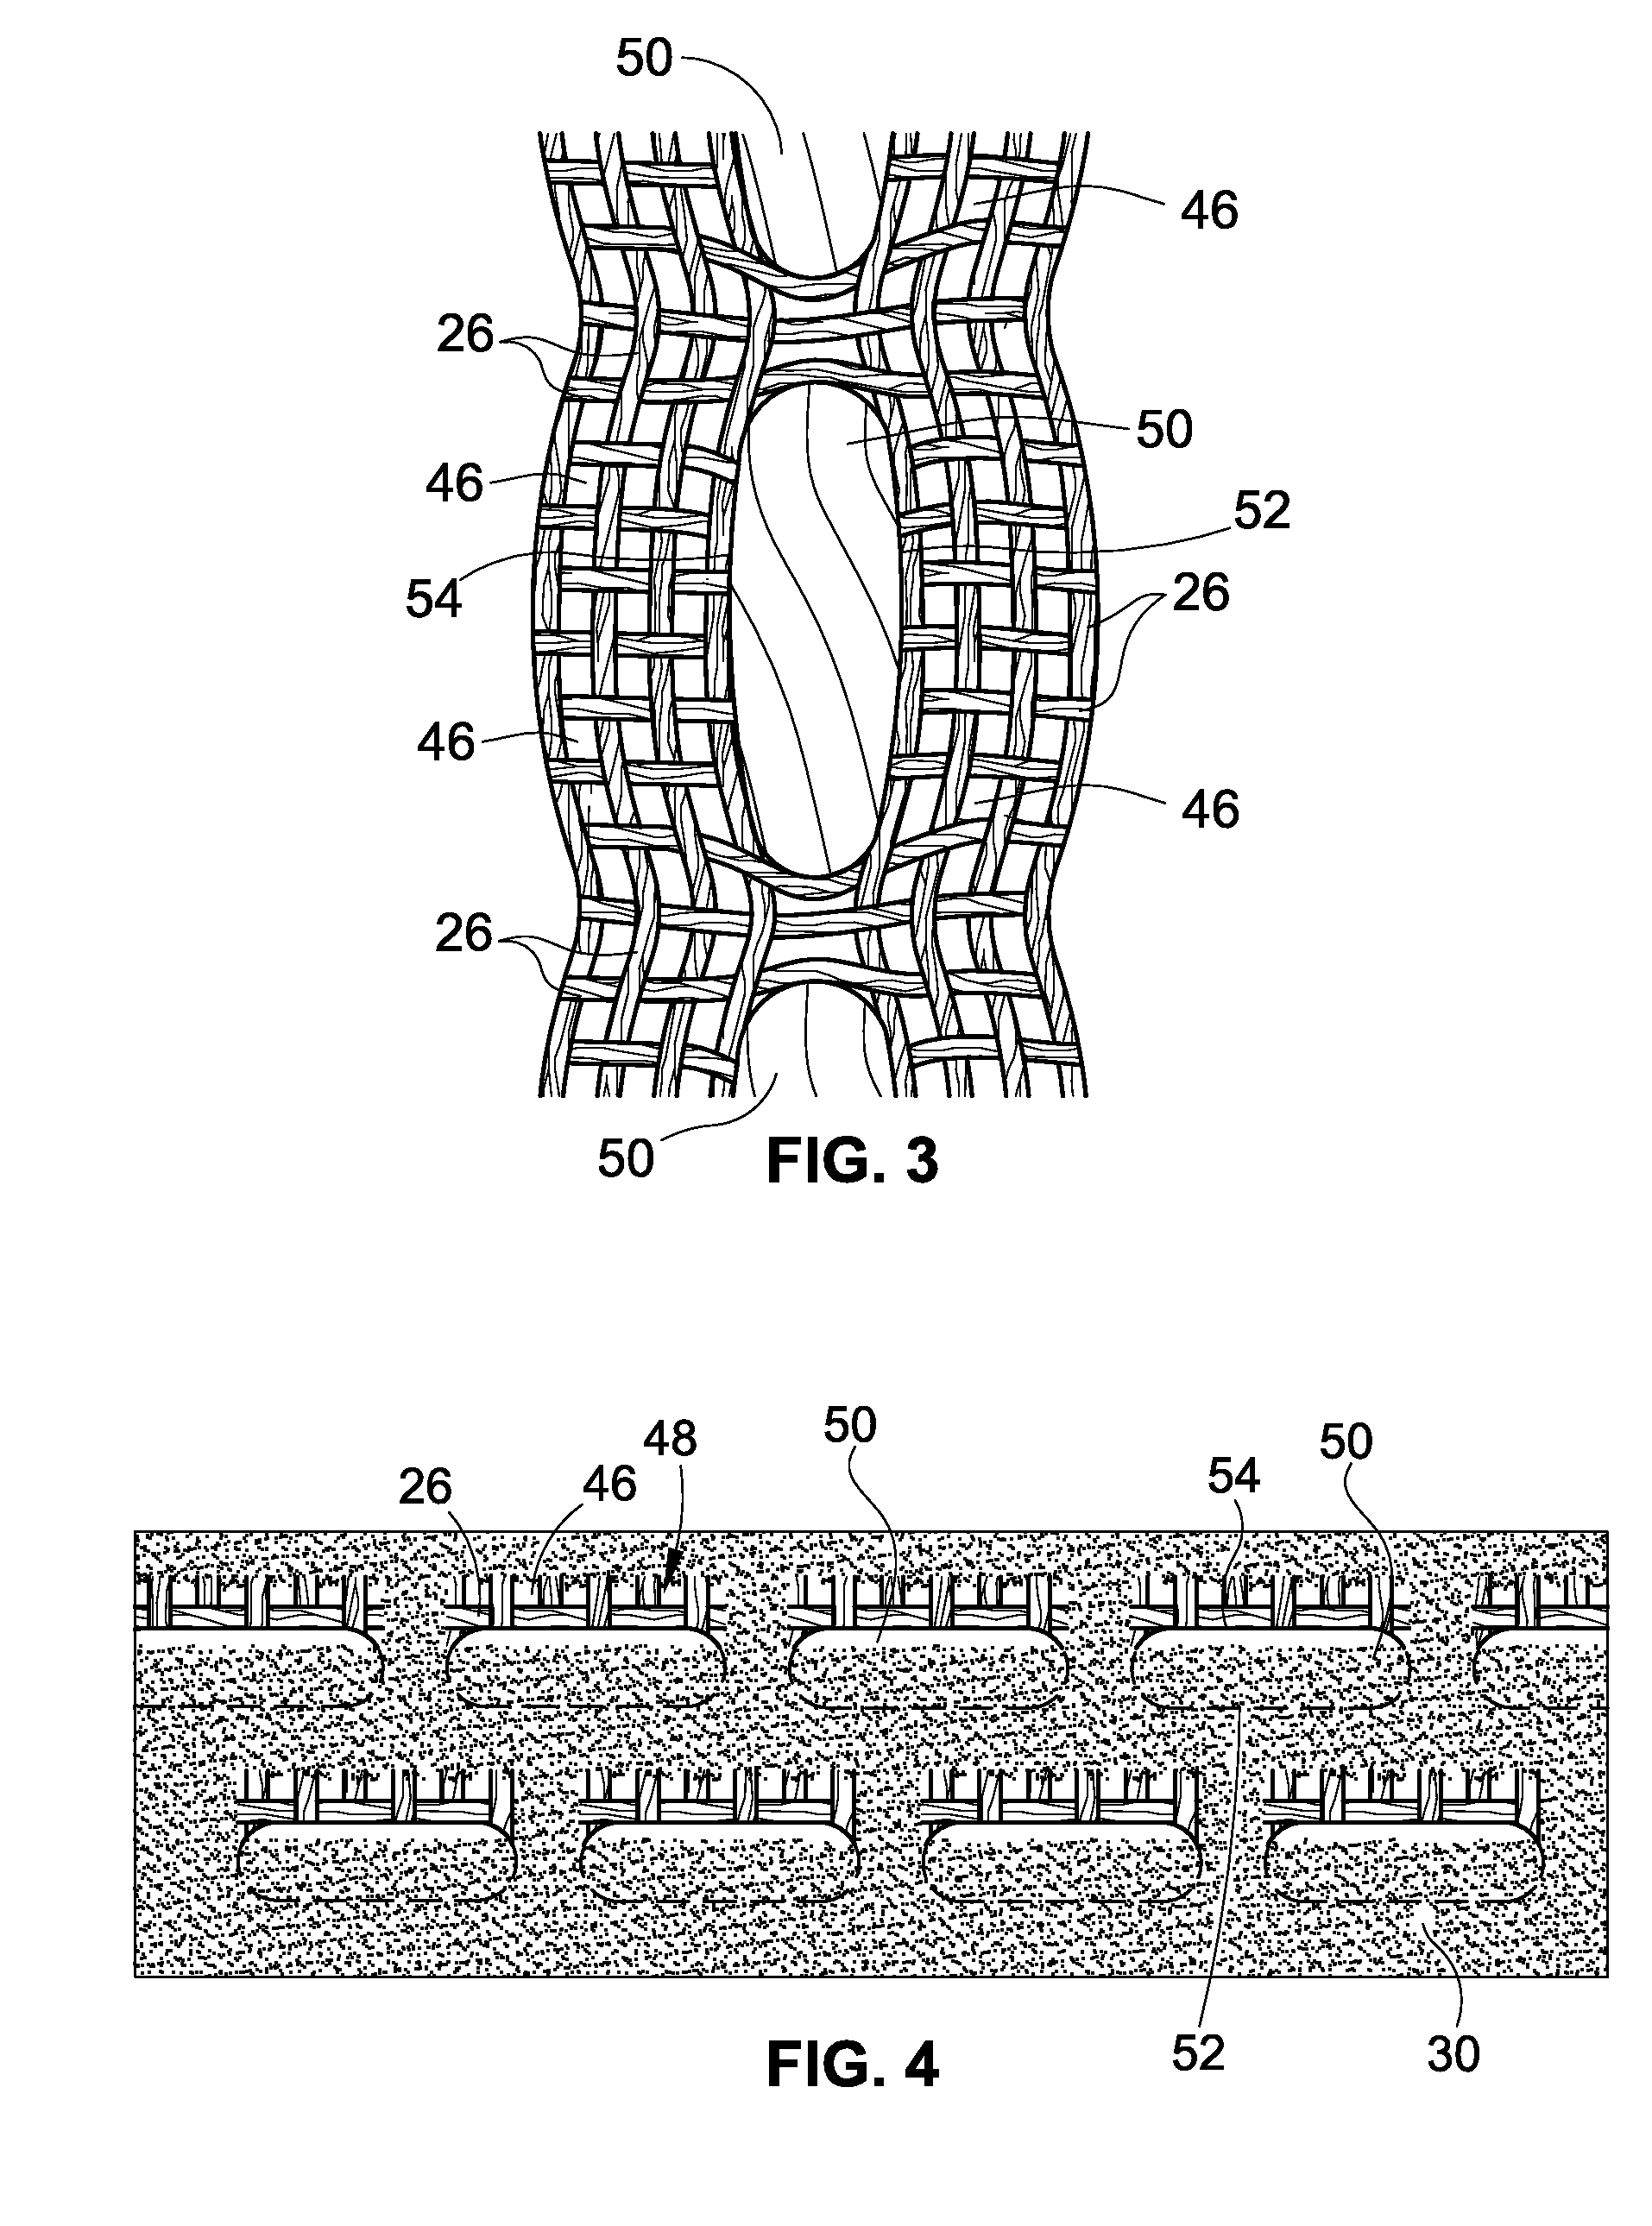 Method for making artificial turf